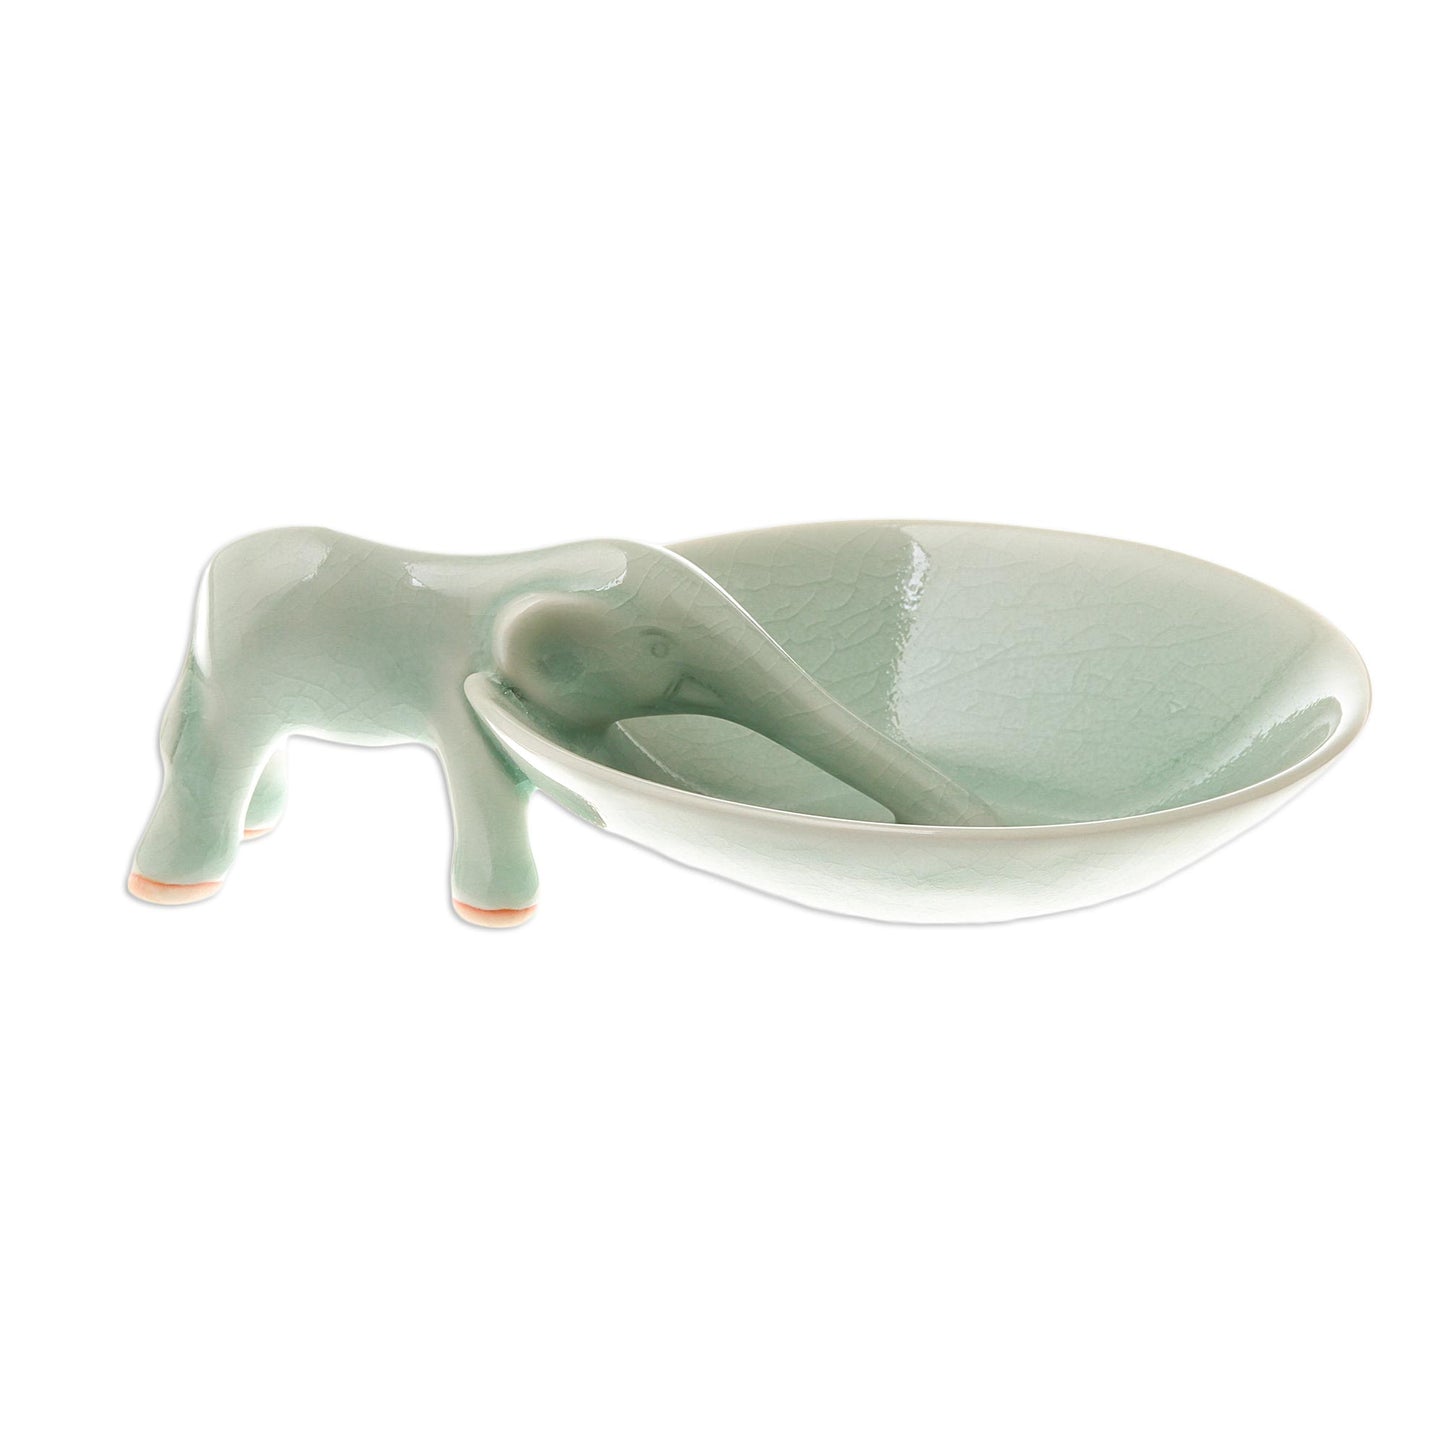 Sipping Elephant Ceramic Incense Holder